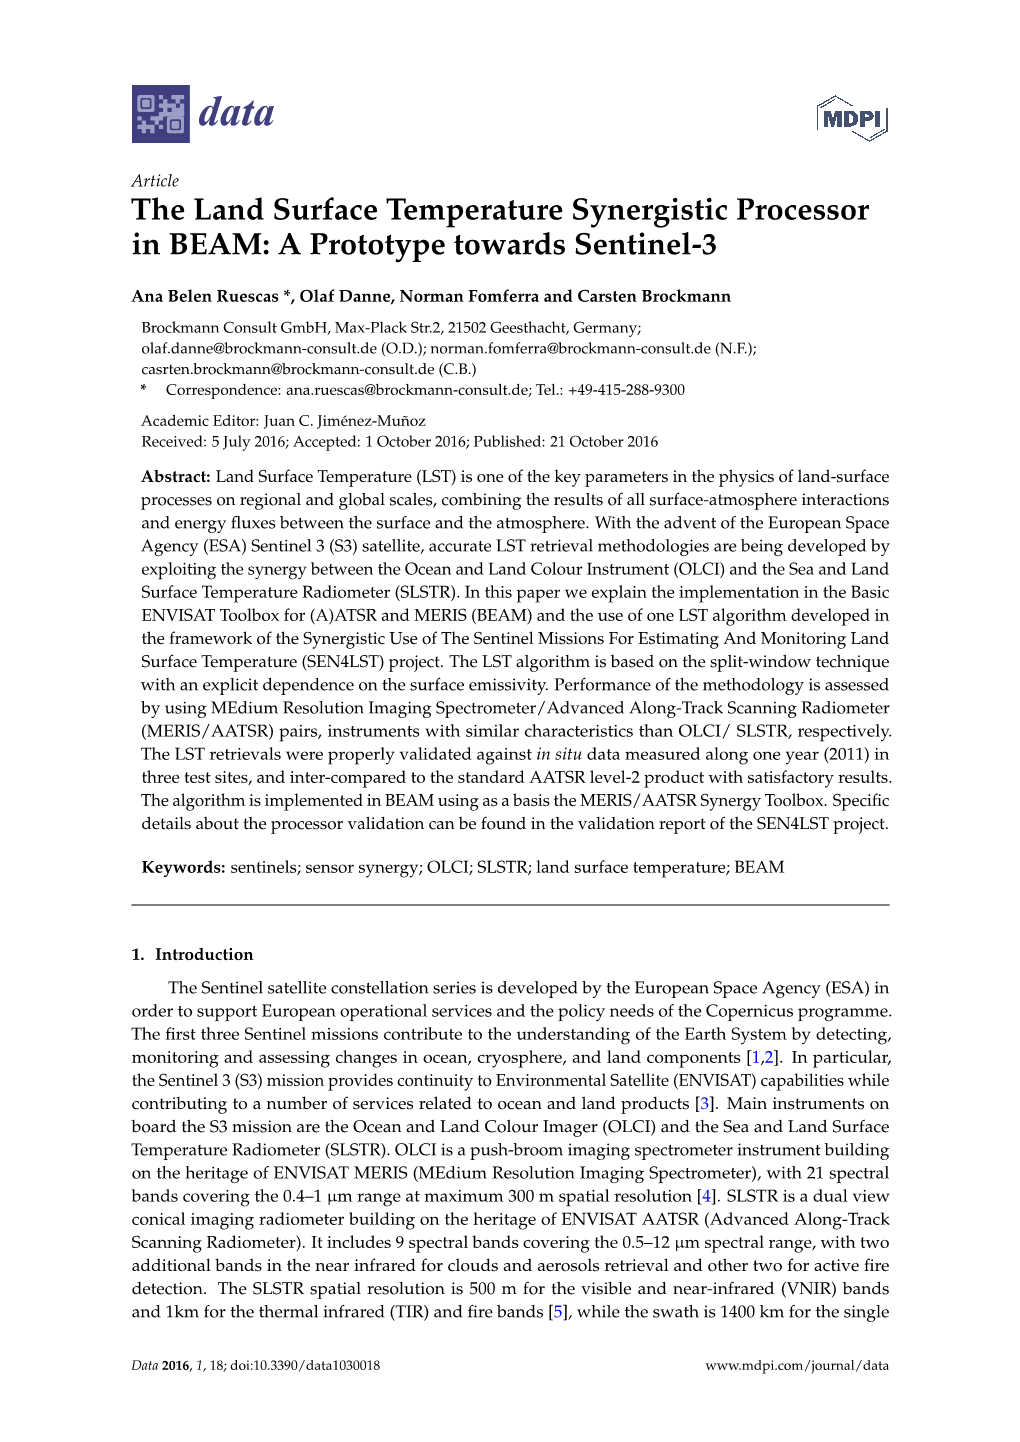 The Land Surface Temperature Synergistic Processor in BEAM: a Prototype Towards Sentinel-3